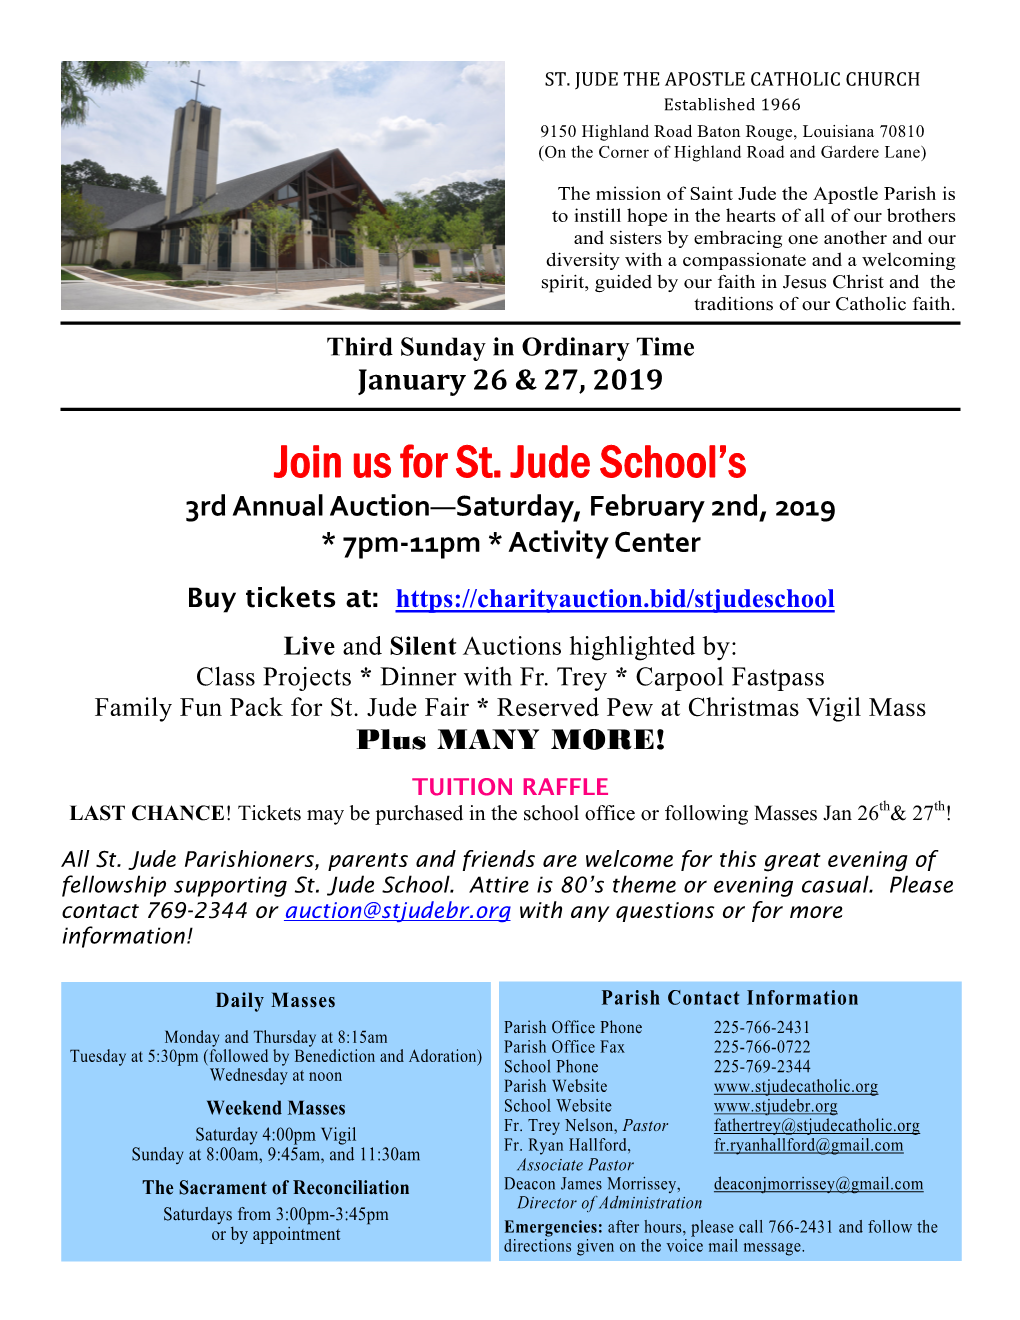 Join Us for St. Jude School's